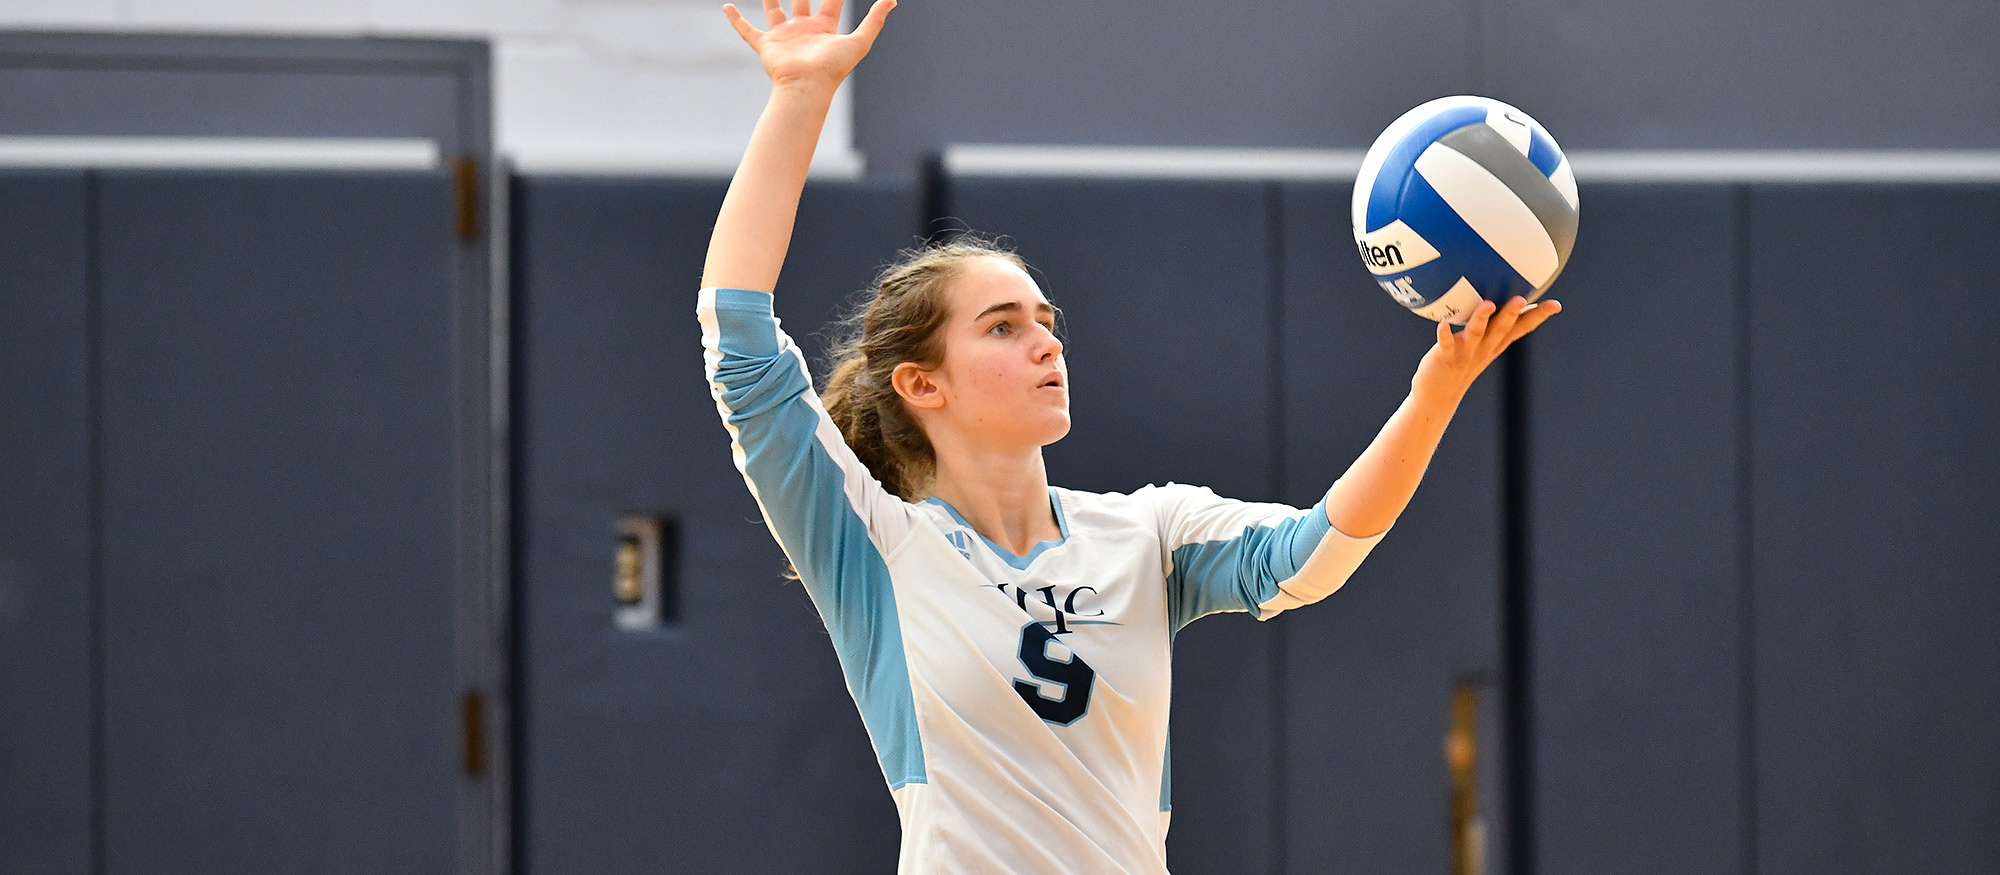 Lucie Berclaz was credited with 35 digs on the day as Mount Holyoke fell 3-1 to Colby and defeated Cazenovia 3-0 on Sept. 10, 2022 in Waterville, Maine. (RJB Sports file photo)